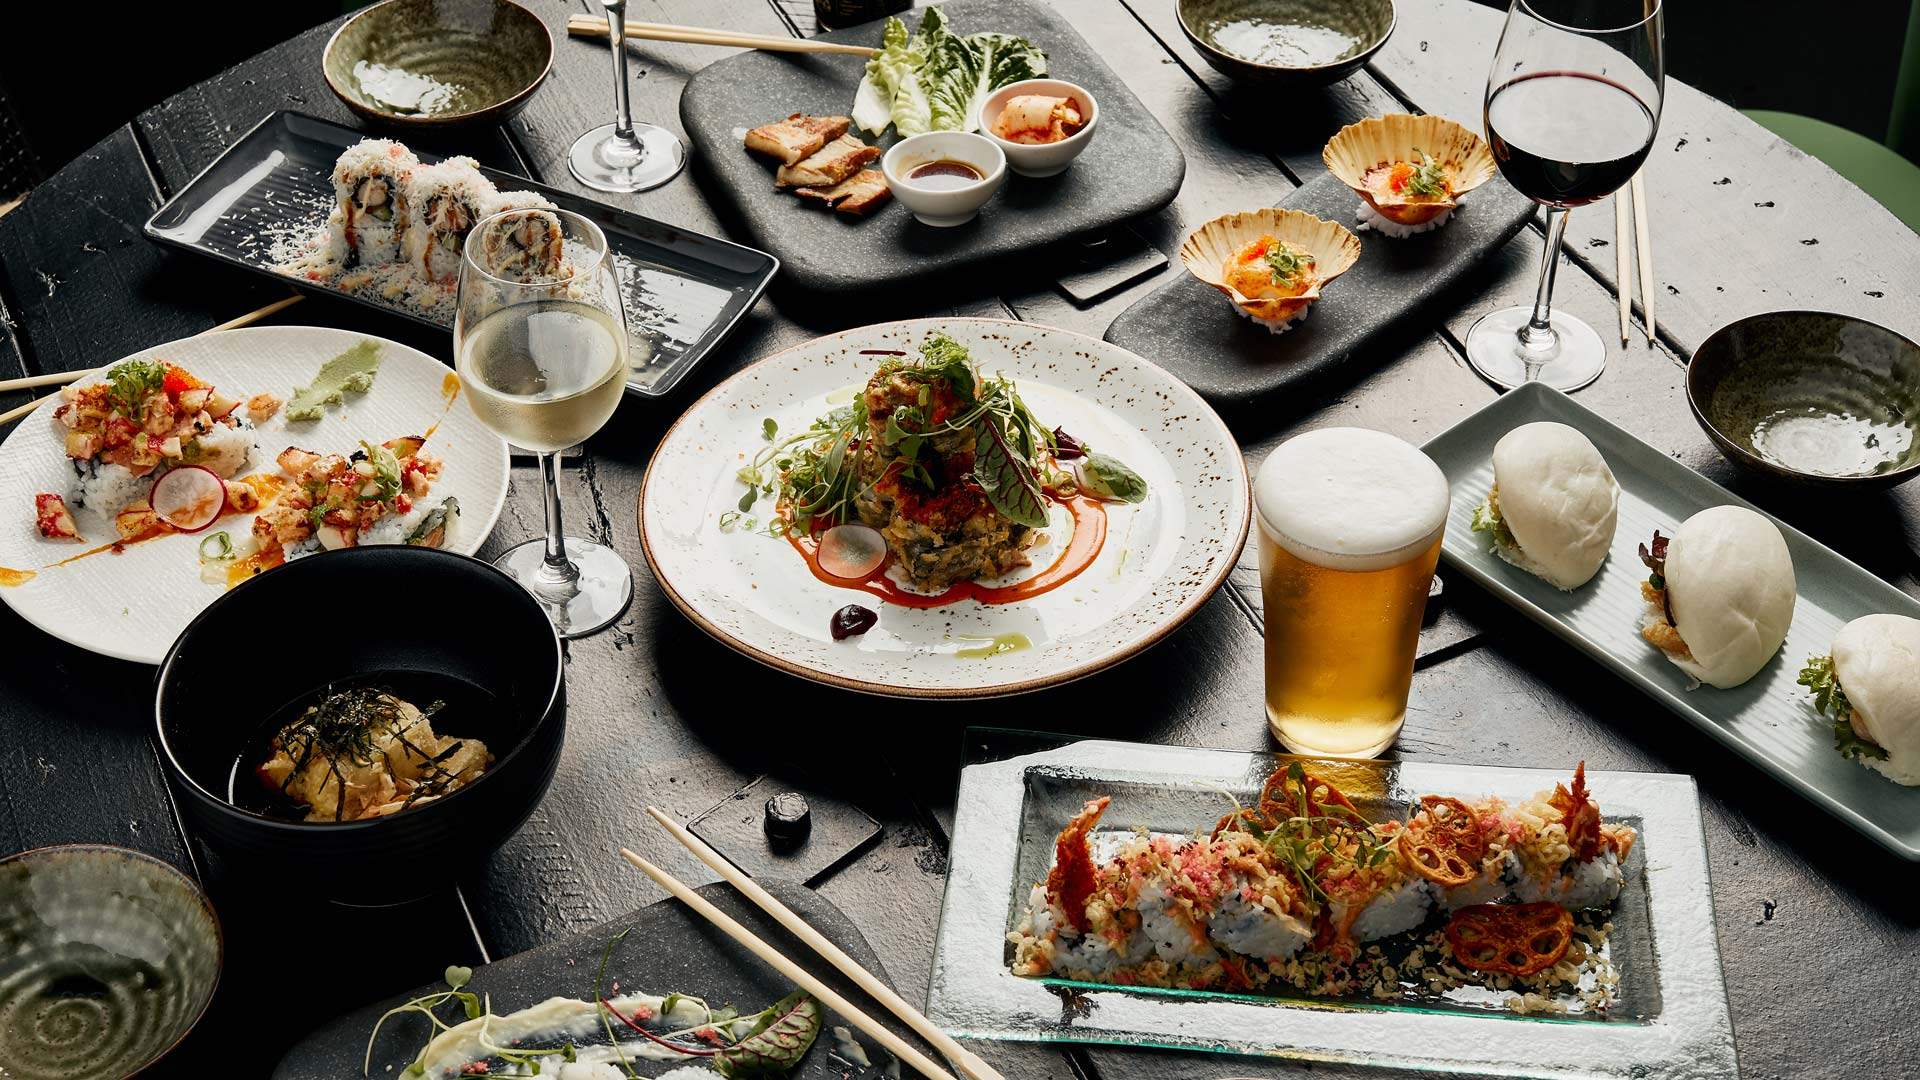 Grand Lafayette Is Prahran's New All-Day Eatery Serving Up $33 All-You-Can-Eat Japanese Feasts